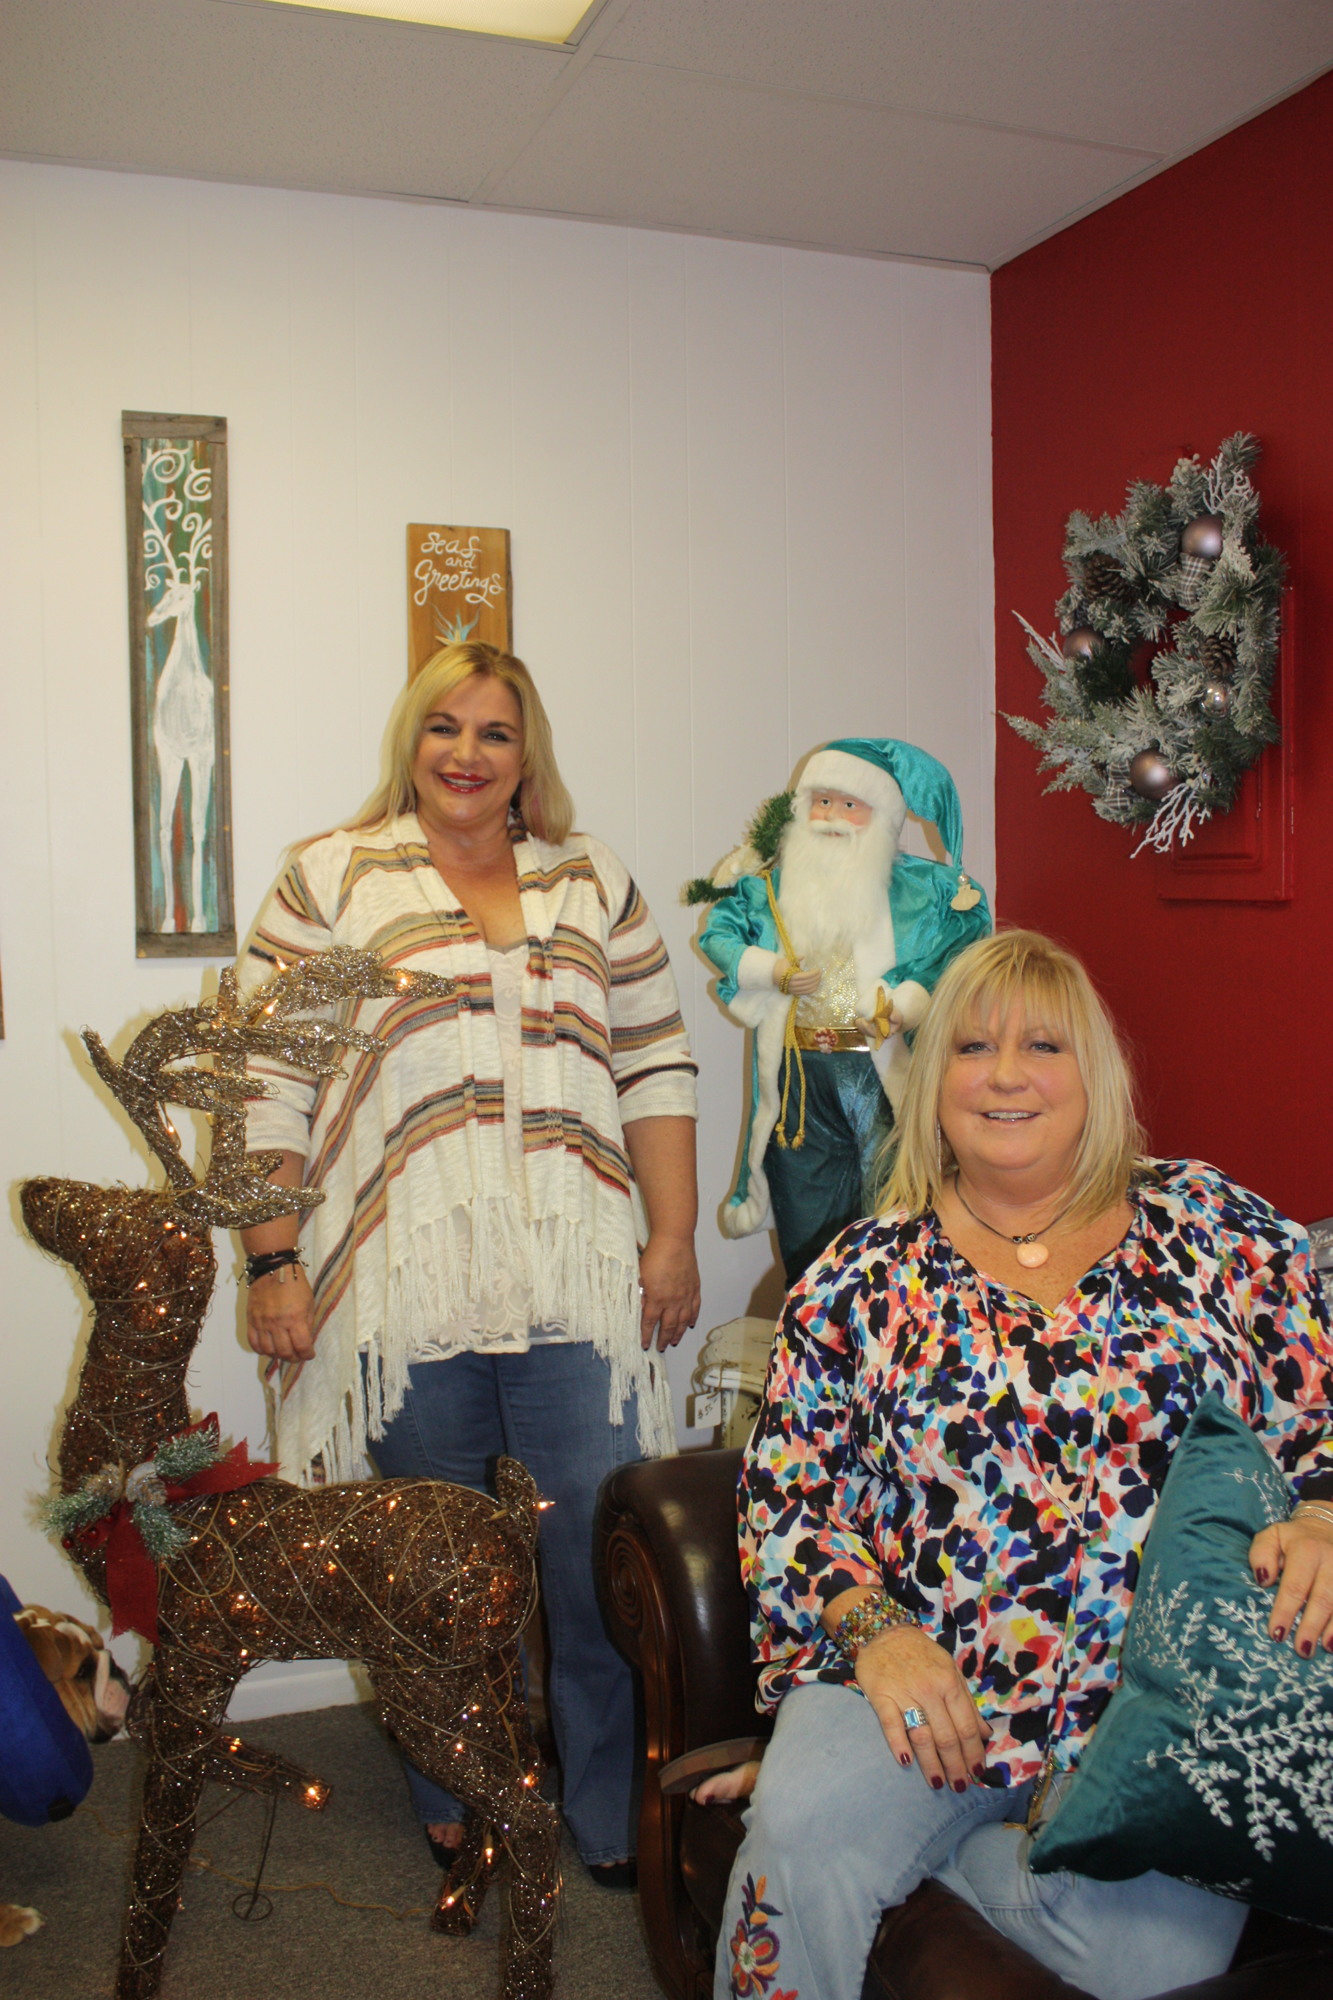 Rochelle Cannon and Angie Vogt are shown in the Christmas Room at Rusty Wagon Art & Funky Furniture Redo Joint. Photo by Wayne Grant